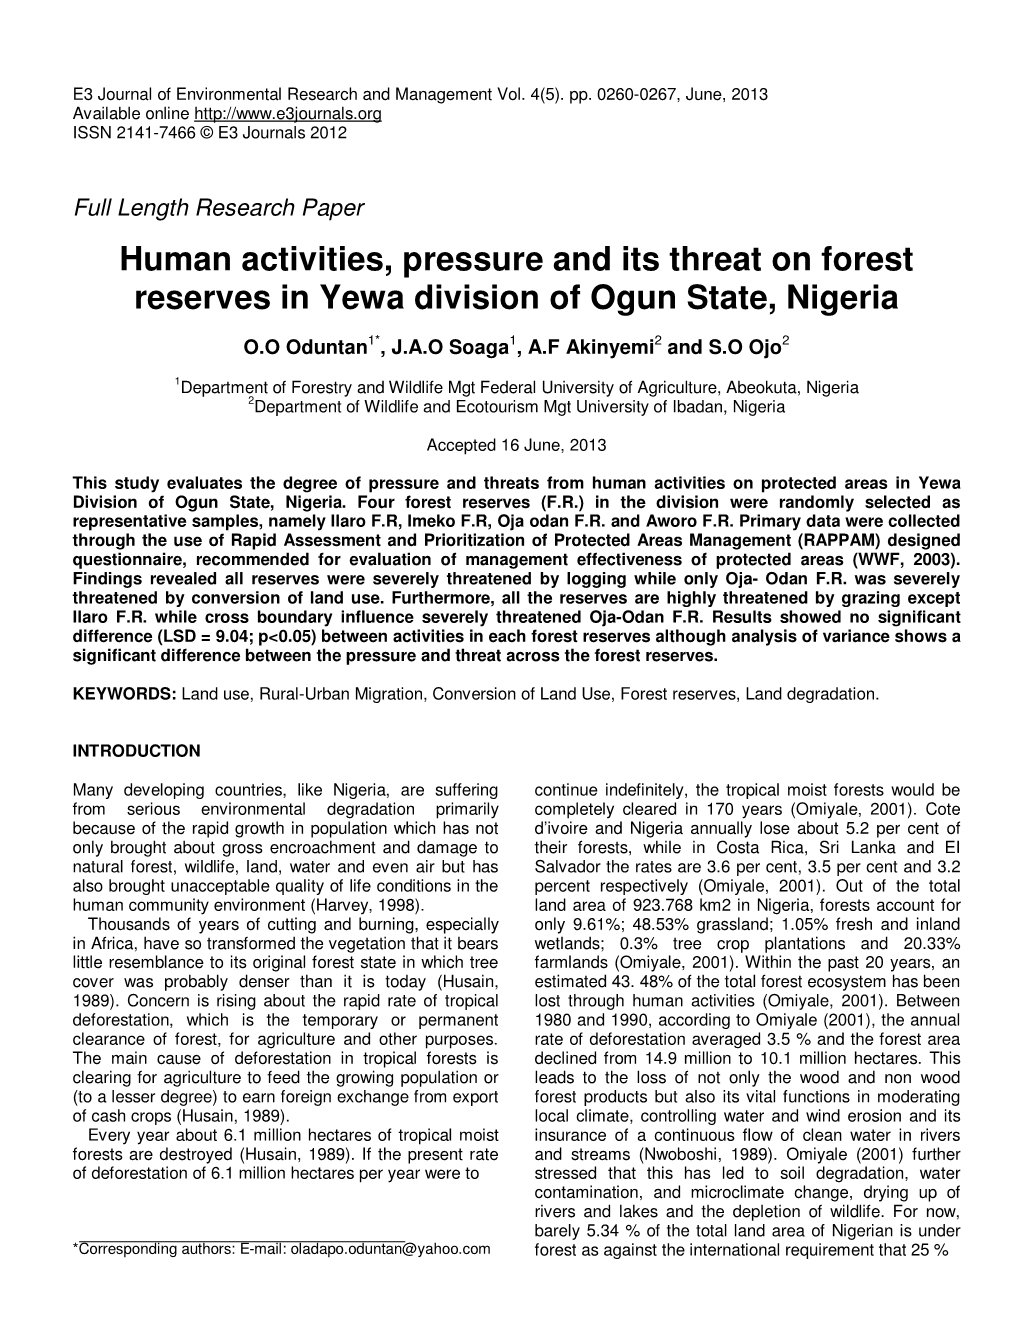 Human Activities, Pressure and Its Threat on Forest Reserves in Yewa Division of Ogun State, Nigeria